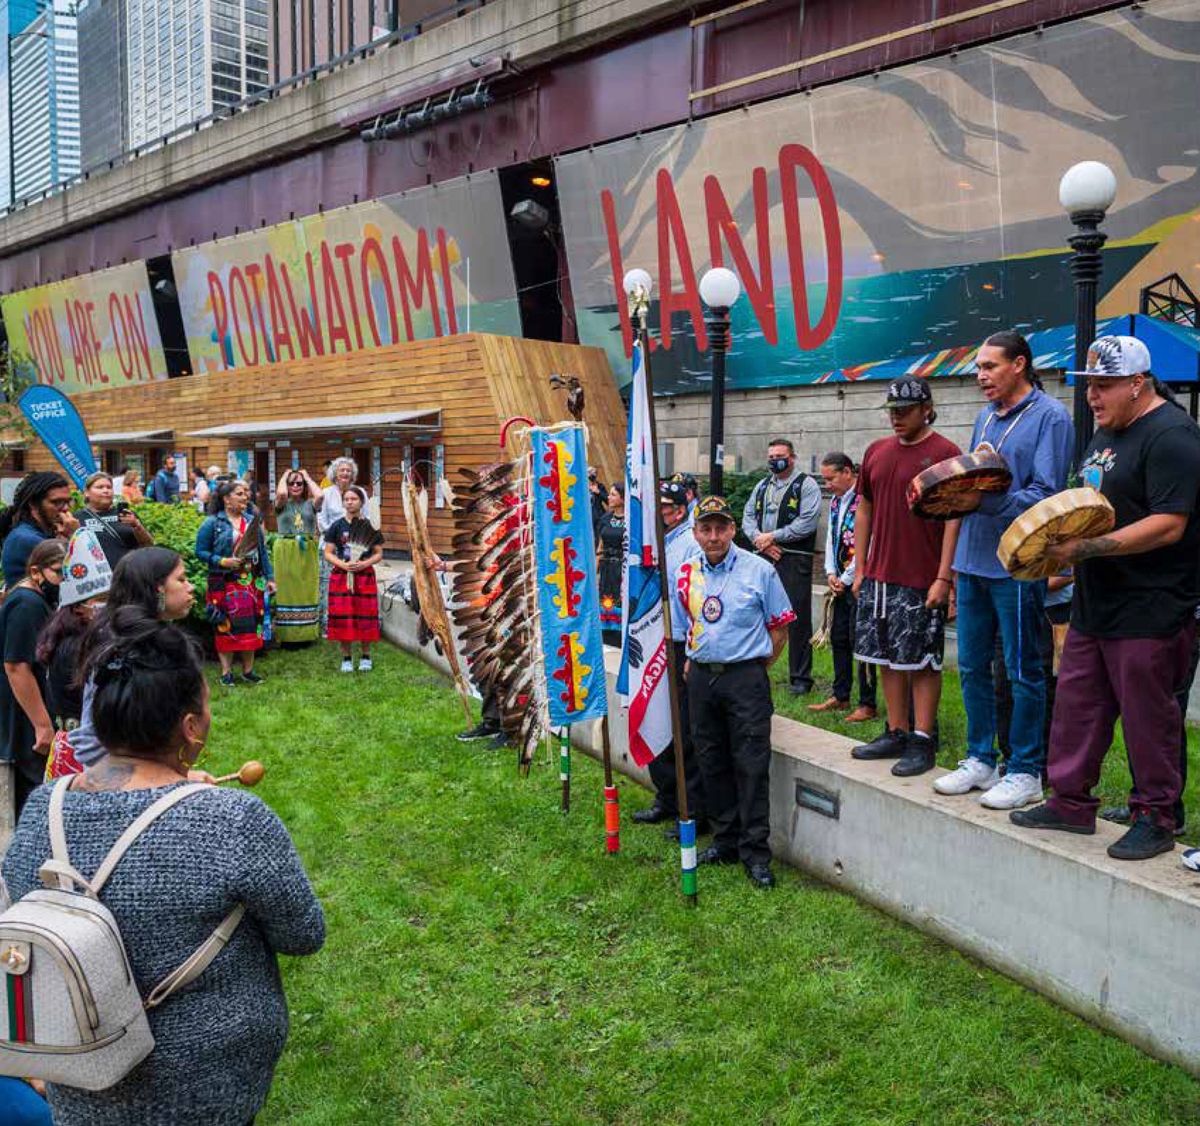 Andrea Carlson's mural You Are On Potawatomi Land (2021) during an Indigenous Peoples' Day celebration in Chicago. Photo © Patrick L. Pyszka, City of Chicago.